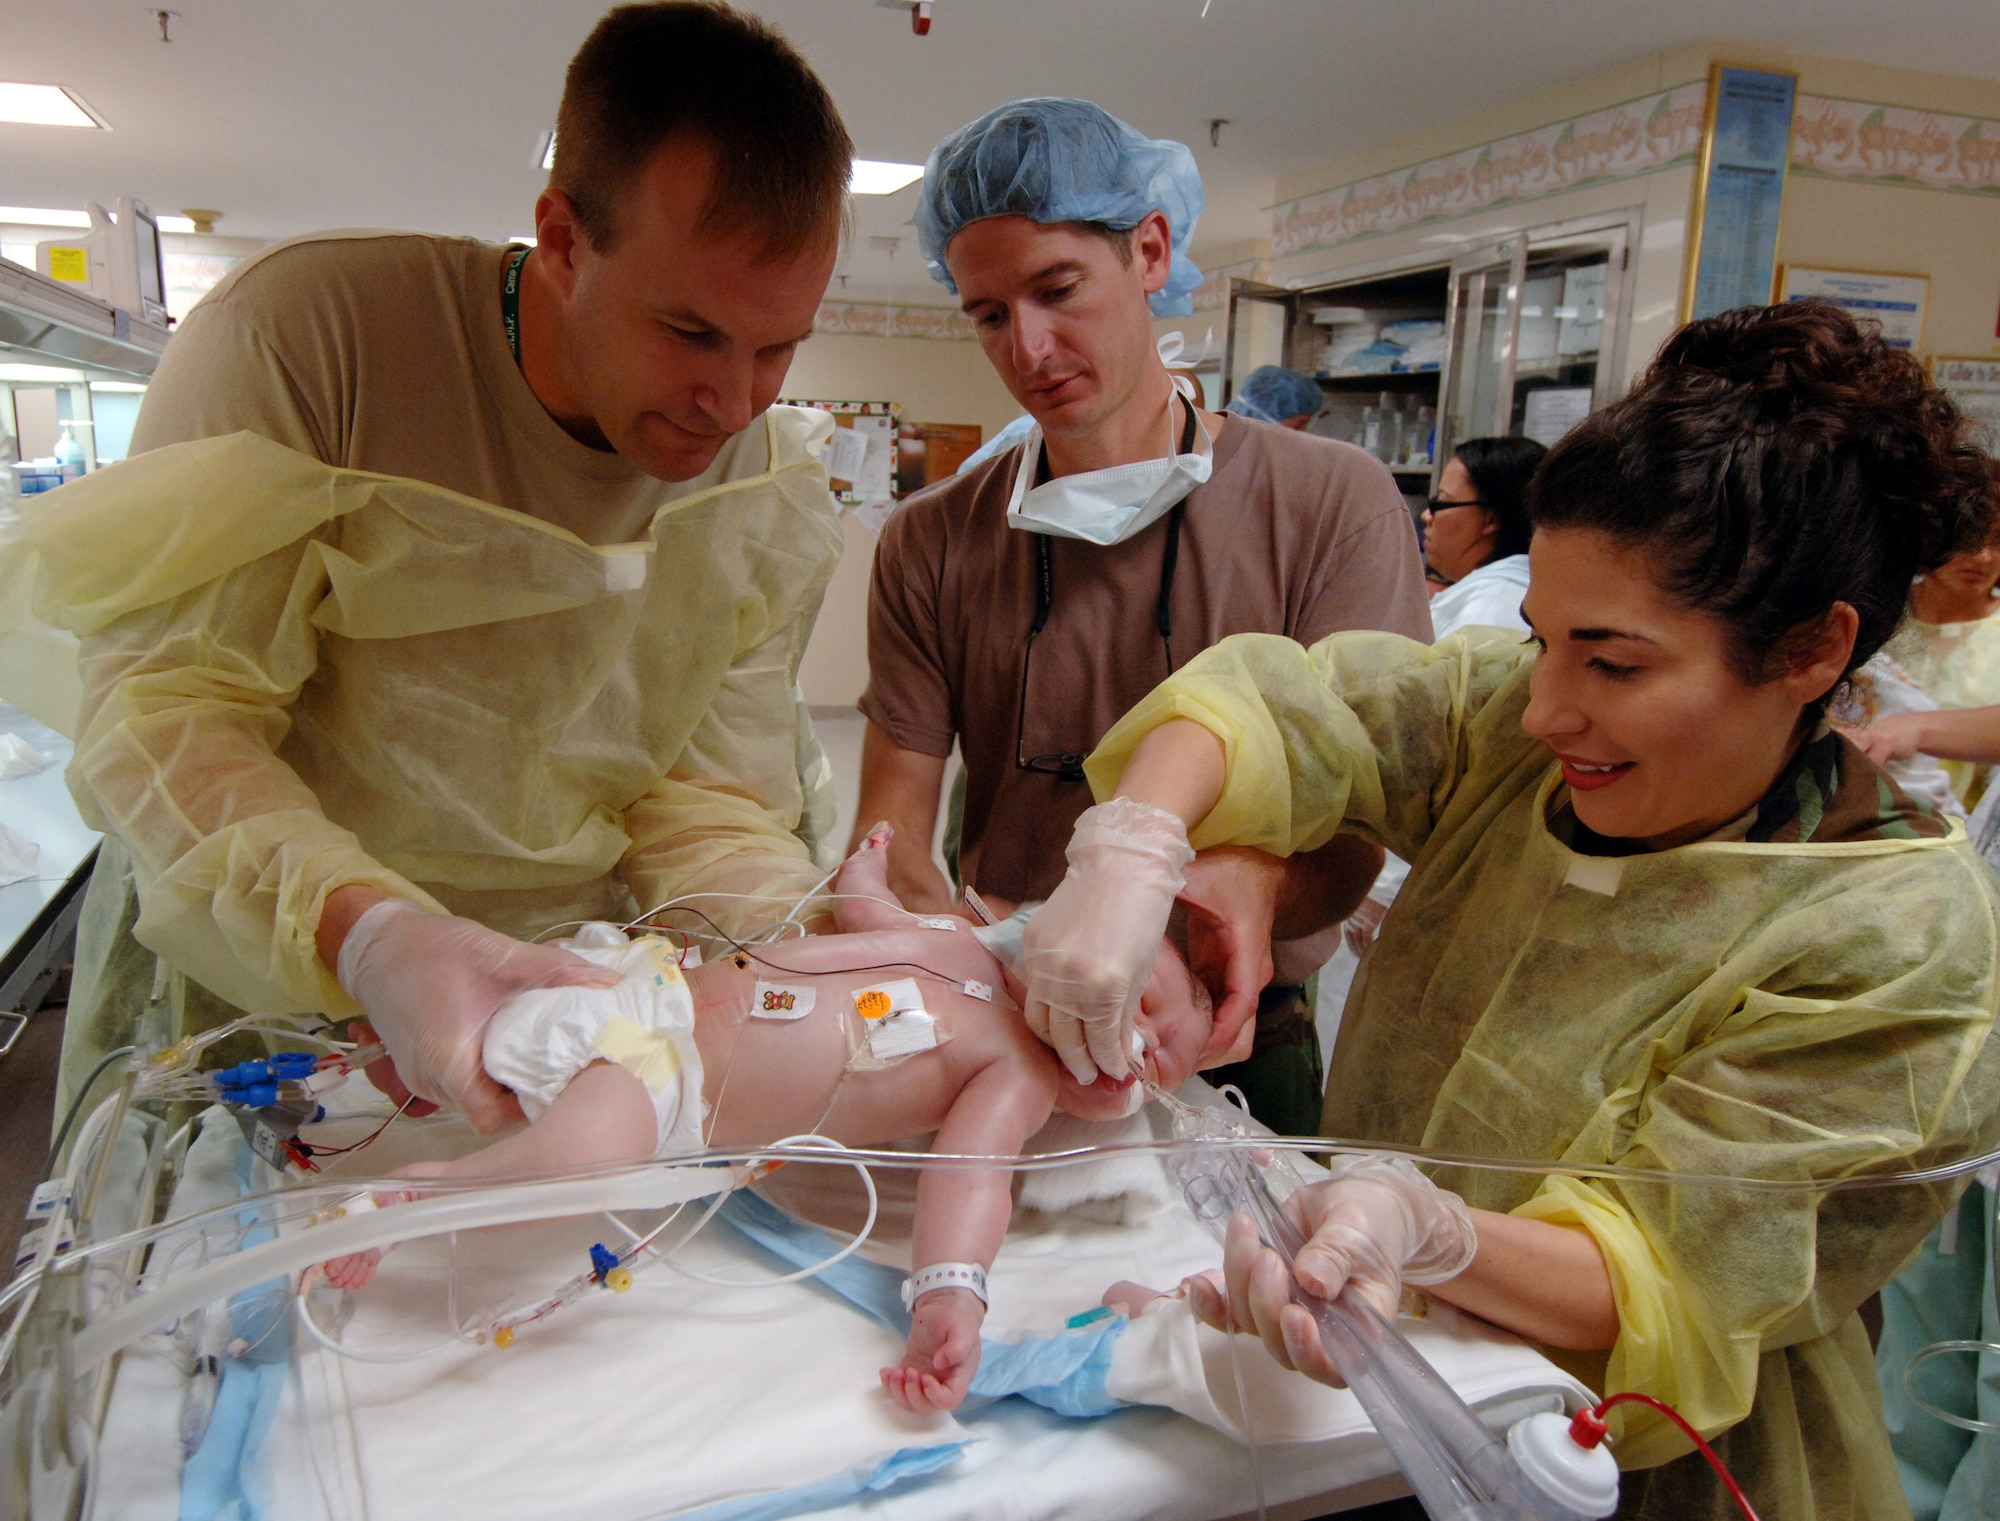 (From left) Army Lt. Col. Mark Croley and Lt. Col. Christopher Coppola and Maj. Melissa Tyree prepare 3-day-old Stuart Parker for surgery to place him on a transportable Extracorporeal Membrane Oxygenation unit on July 21 in San Juan, Puerto Rico. An ECMO team comprised Air Force and Army medical specialists from the Wilford Hall Medical Center at Lackland Air Force Base, Texas, flew to Puerto Rico to transport Stuart to San Antonio for more advanced care. Colonel Croley and Major Tyree are neonatal doctors and Colonel Coppola is a pediatric surgeon at the Wilford Hall Medical Center. (U.S. Air Force photo/Master Sgt. Scott Reed) 